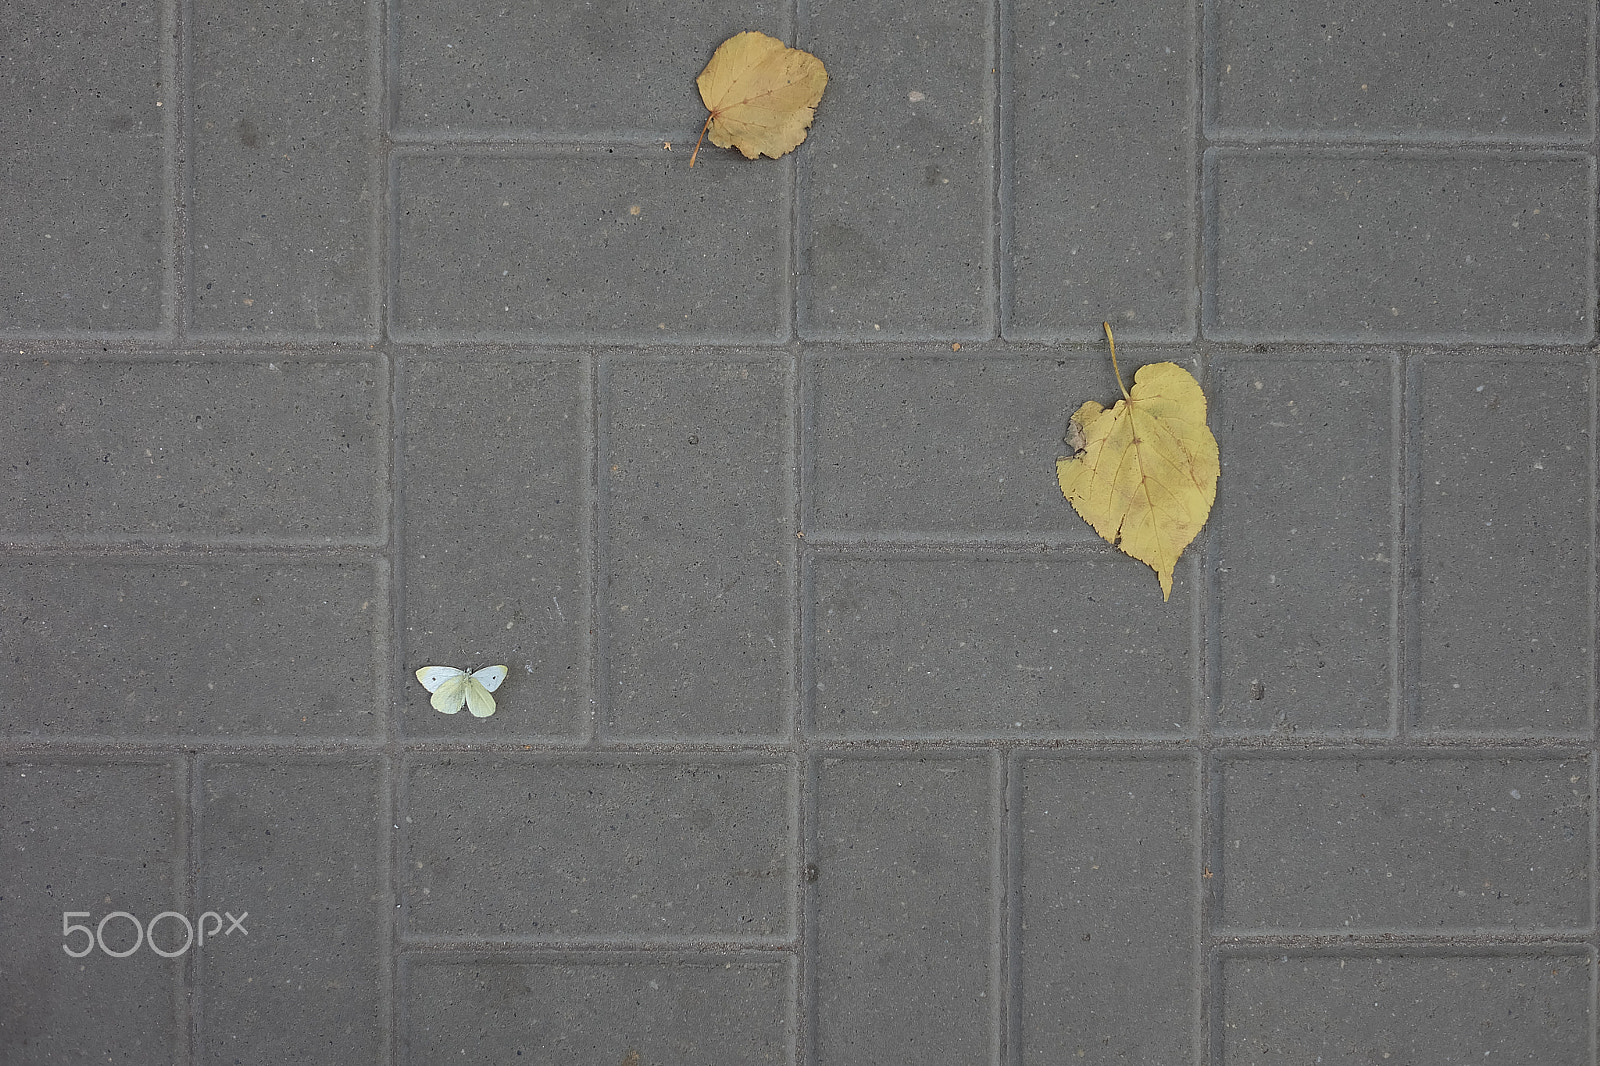 Fujifilm X-A1 sample photo. Autumn leaves and a butterfly on the sidewalk tile photography